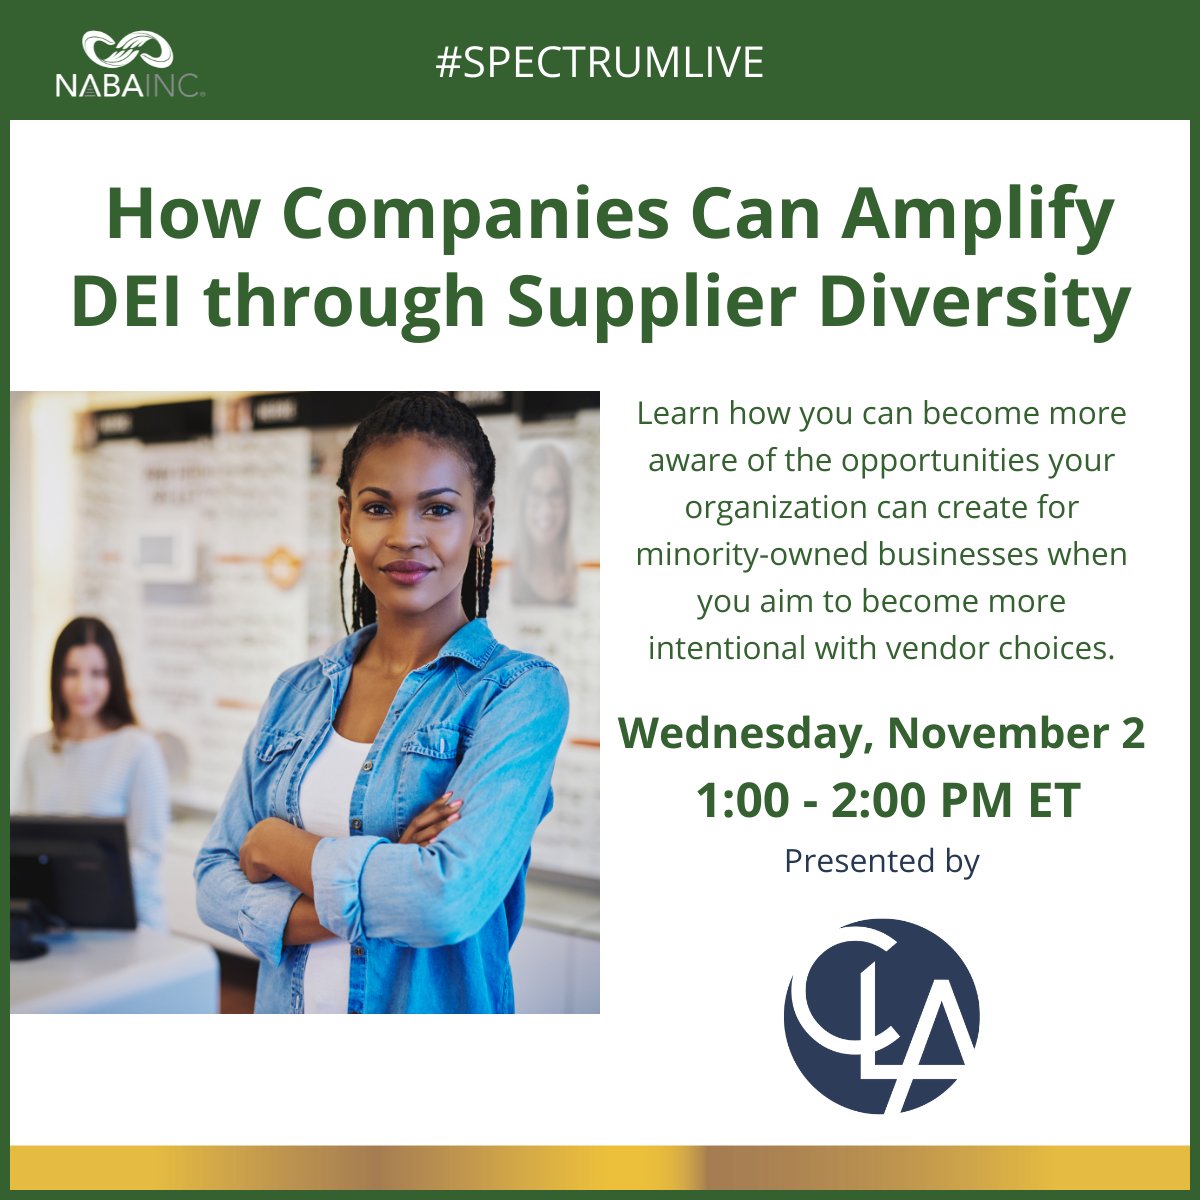 Starting now! Join us for #SpectrumLive in partnership with CLA, and learn how your organization can create more opportunities for minority-owned businesses by being intentional with vendor choices.

Register here: bit.ly/3ztx1fz